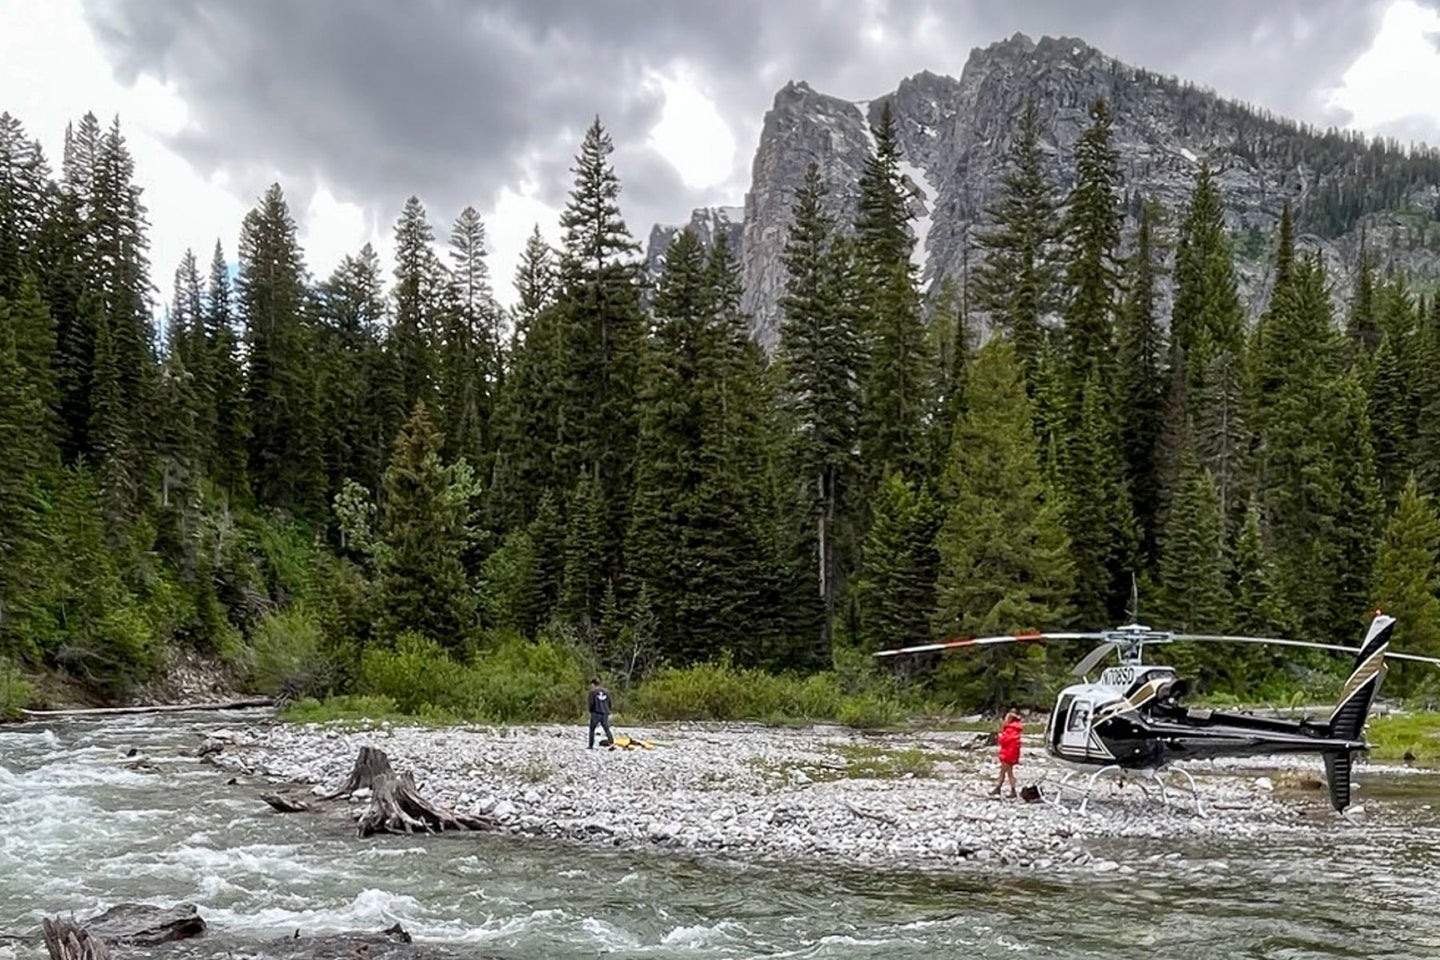 The pilot has had aviation-related run-ins with the National Park Service before. 